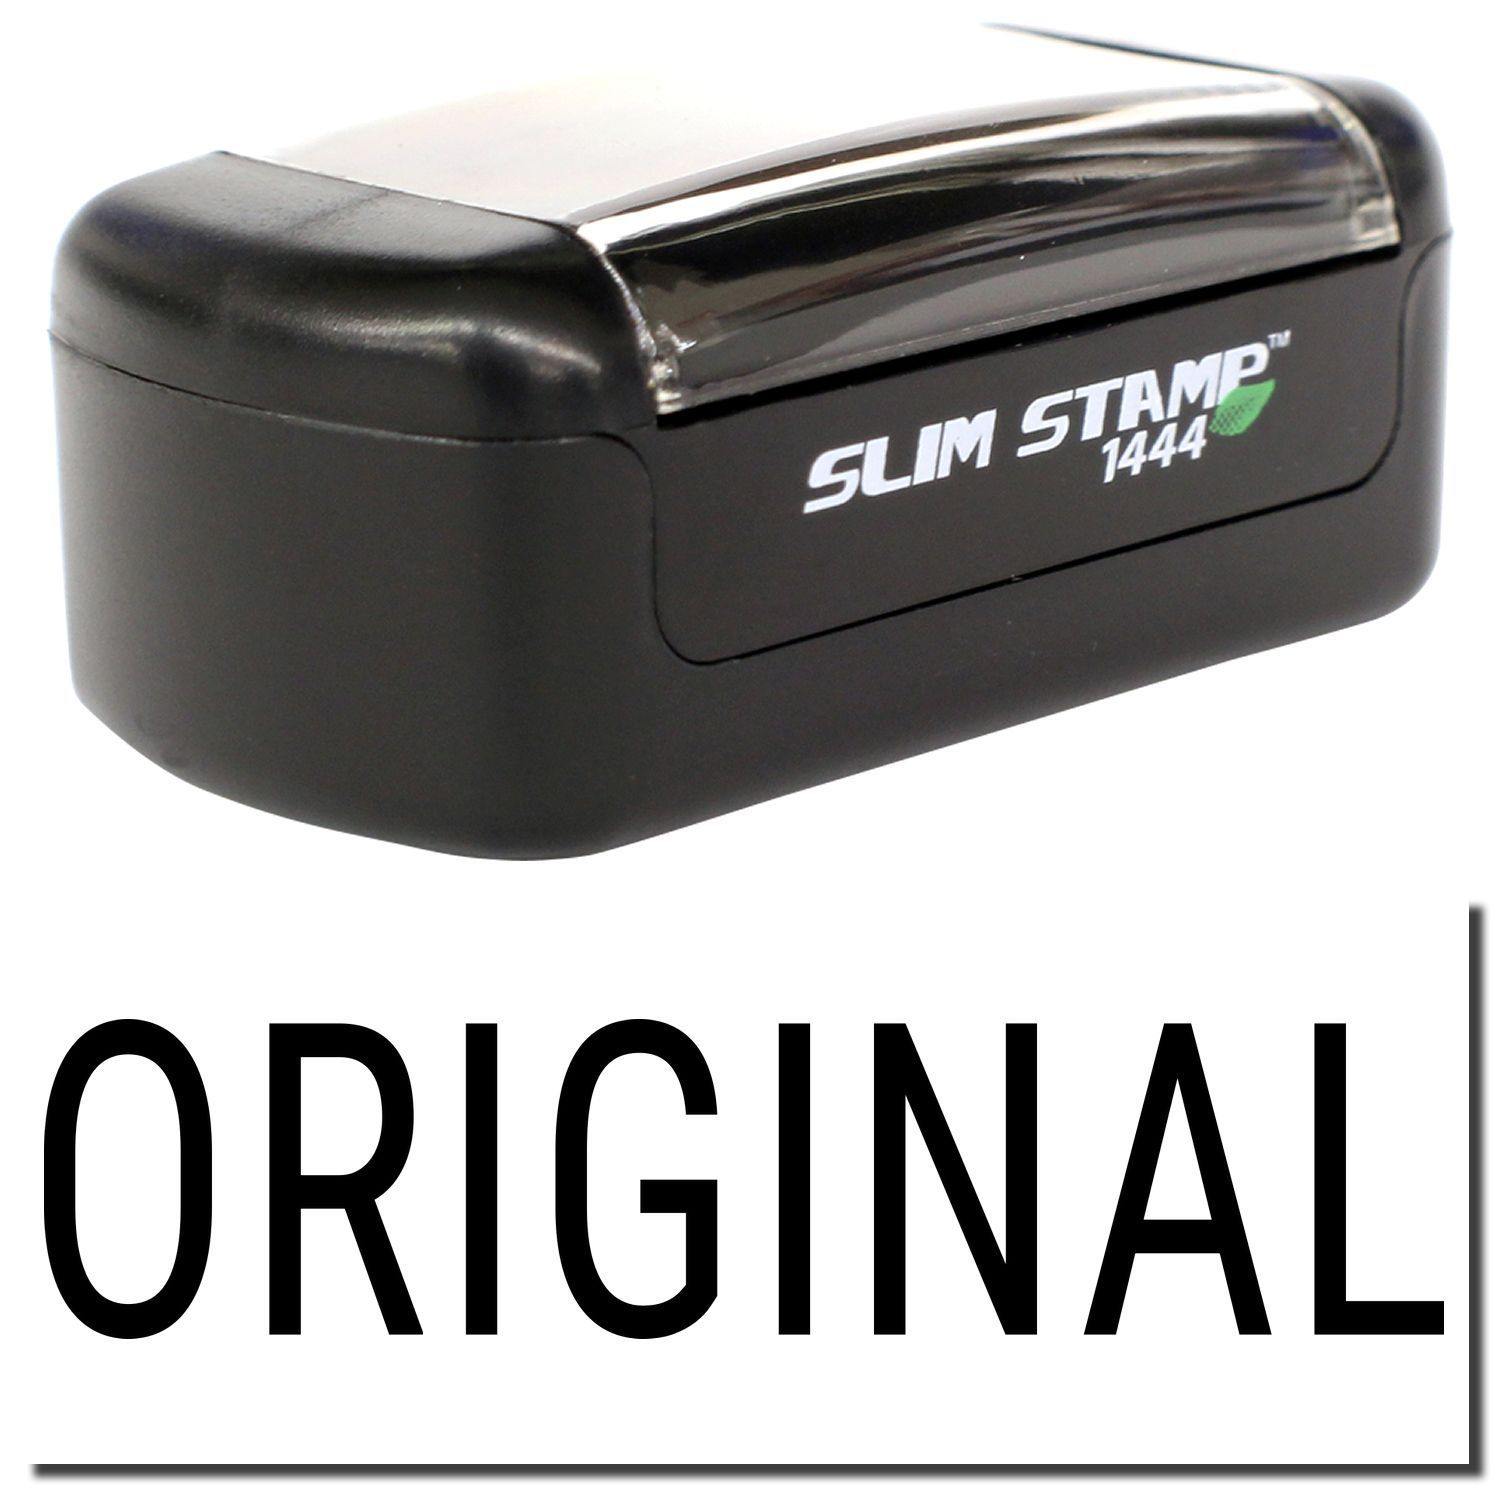 A stock office pre-inked stamp with a stamped image showing how the text "ORIGINAL" in a narrow font is displayed after stamping.